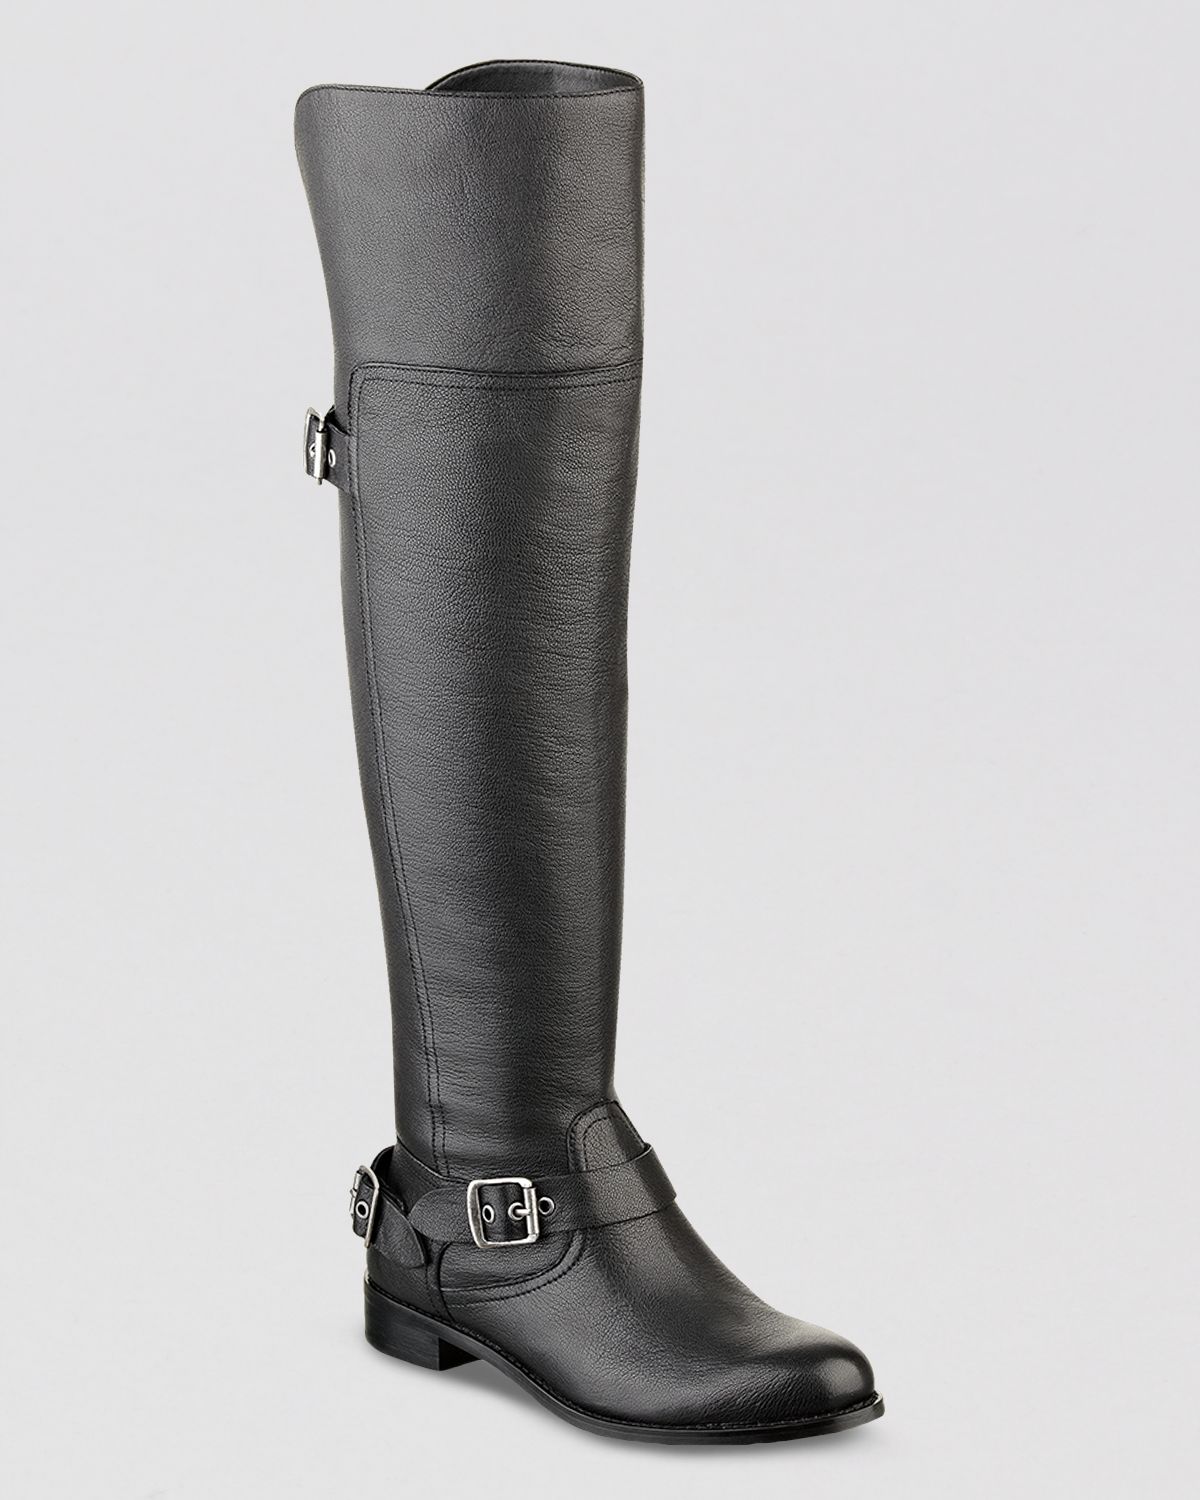 Guess Over The Knee Tall Riding Boots Igal in Black | Lyst